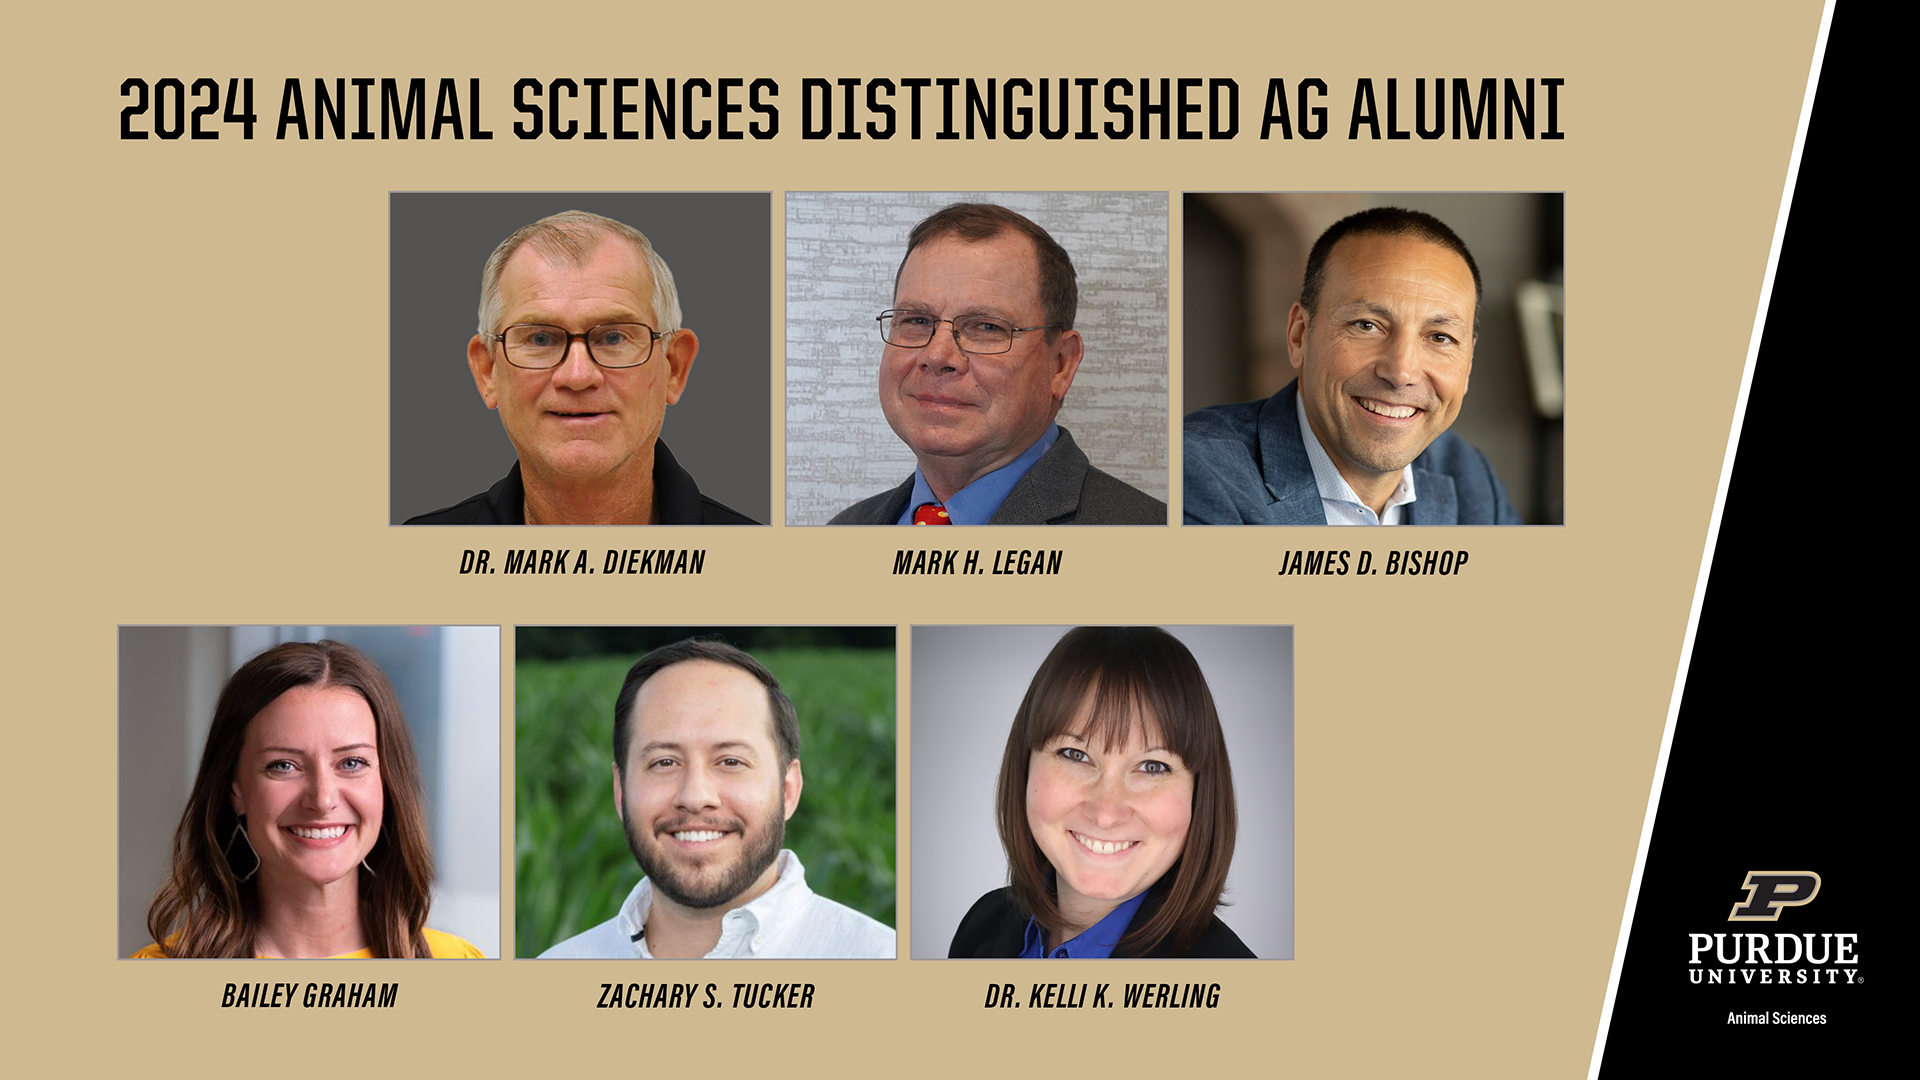 2024 Animal Sciences Distinguished Alumni headshots. This year's recipients are Dr. Mark A. Diekman, Mark H. Legan, James D. Bishop, Bailey Graham, Zachary S. Tucker, and Dr. Kelli K. Werling.